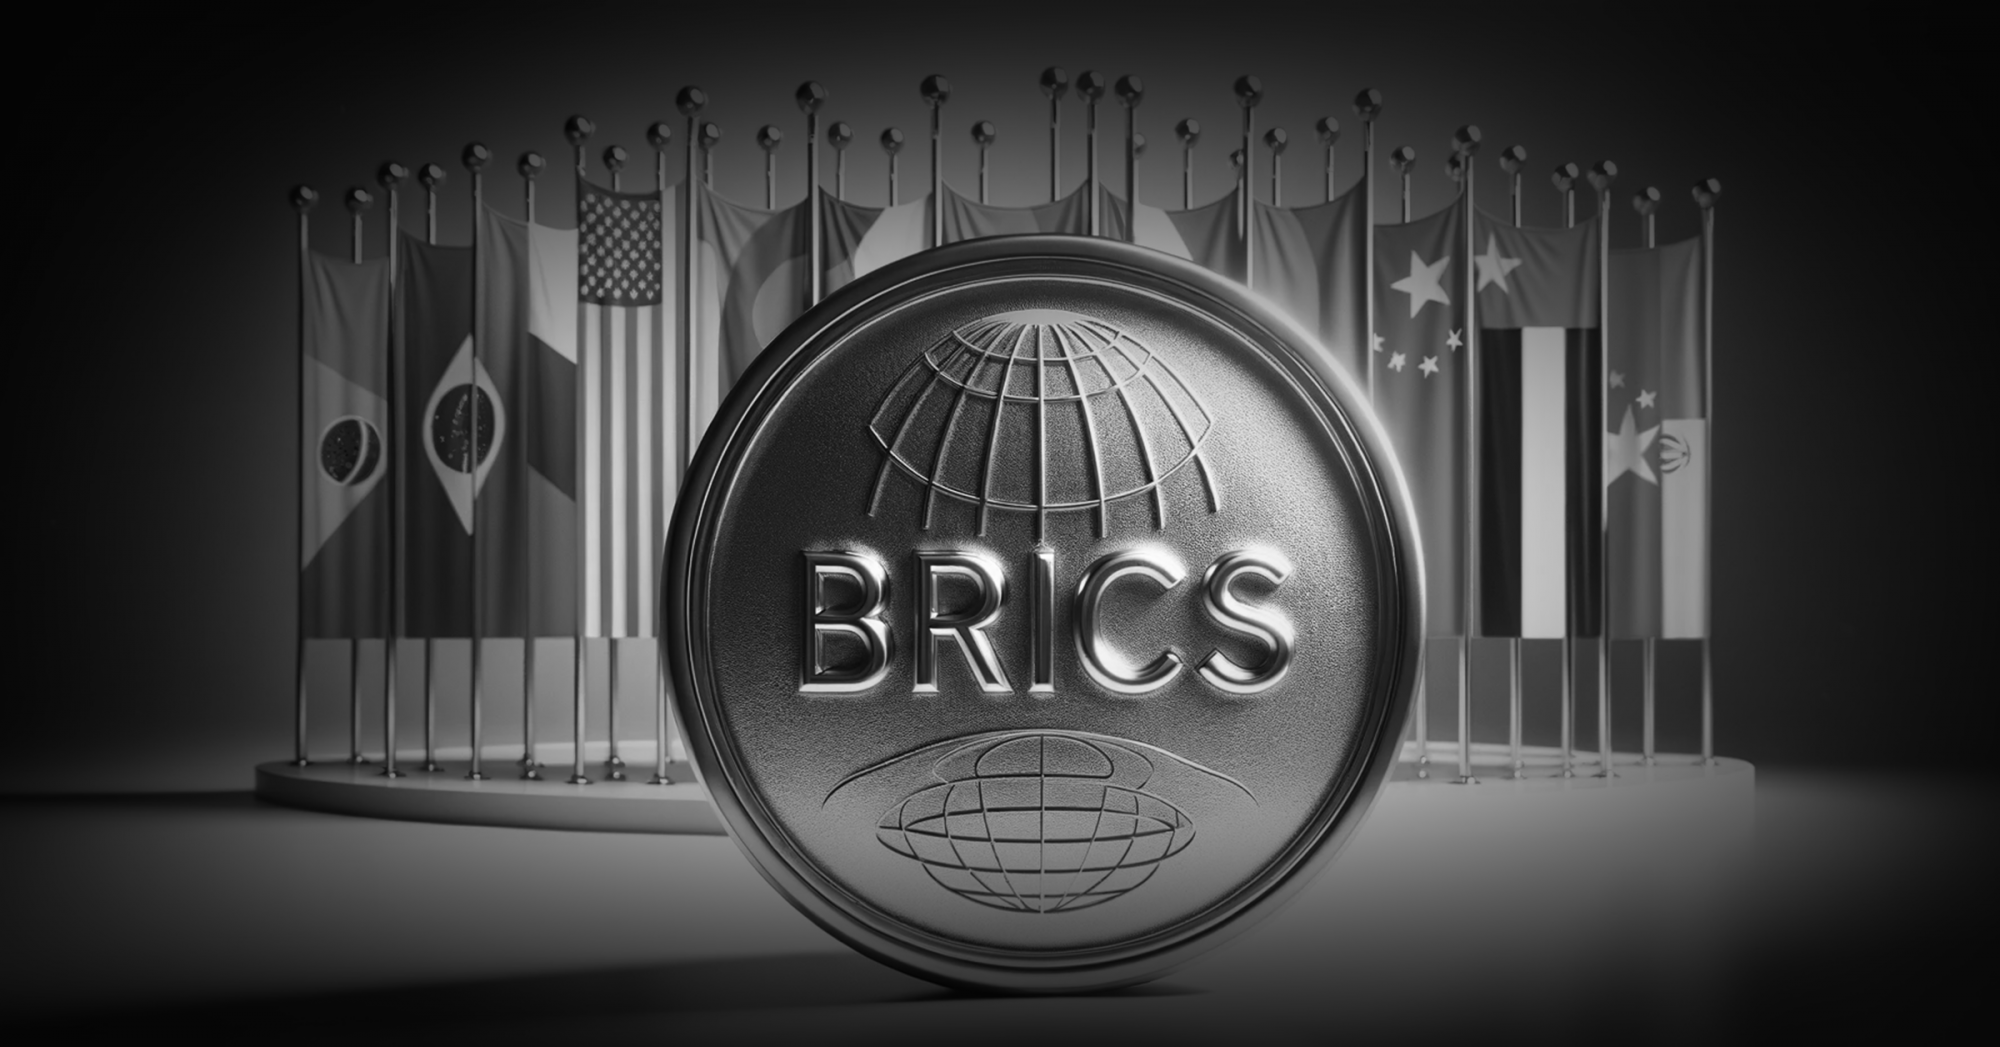 How BRICS Got "Rug Pulled" – Crypto Counterfeiting is on the Rise